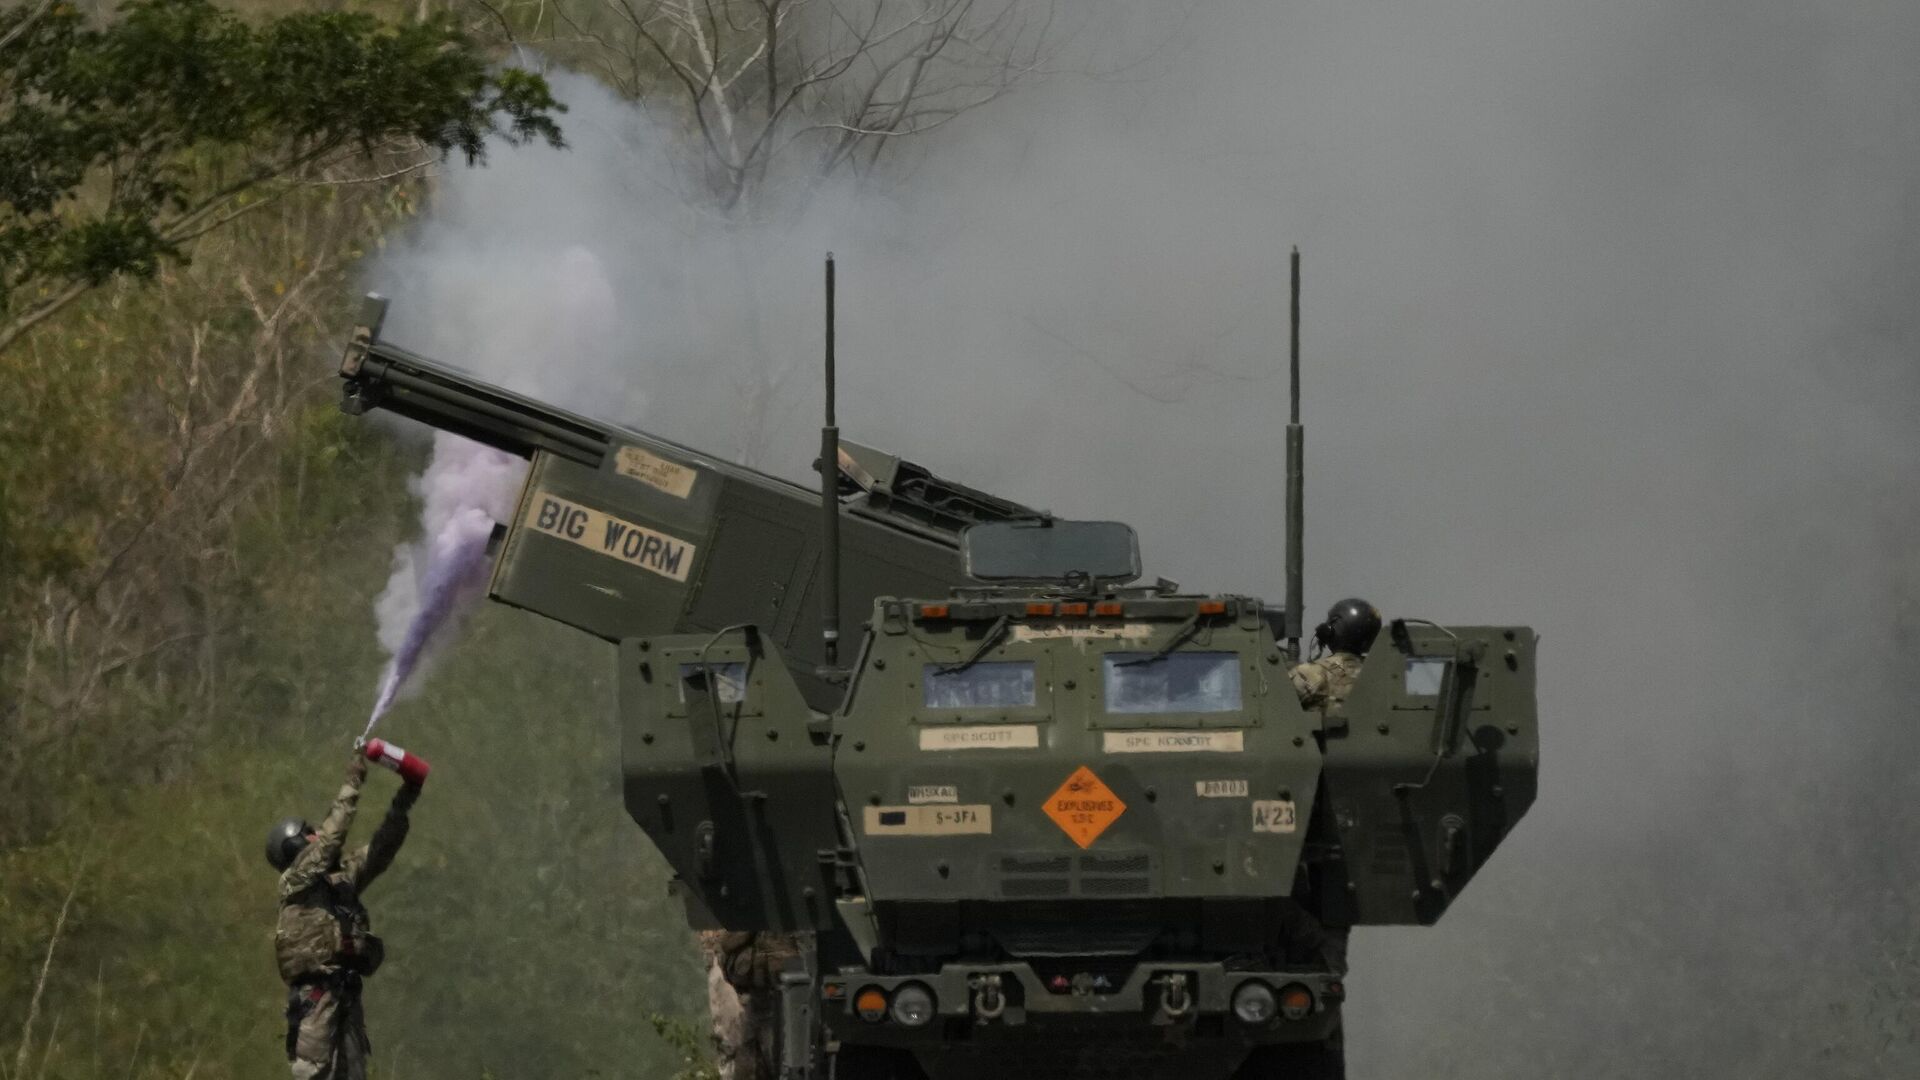 A US soldier extinguishes a fire on one fo the tubes on a U.S. M142 High Mobility Artillery Rocket System (HIMARS) after firing missiles during a joint military drill between the Philippines and the U.S. called Salaknib at Laur, Nueva Ecija province, northern Philippines on Friday, March 31, 2023. - اسپوتنیک ایران  , 1920, 16.09.2023